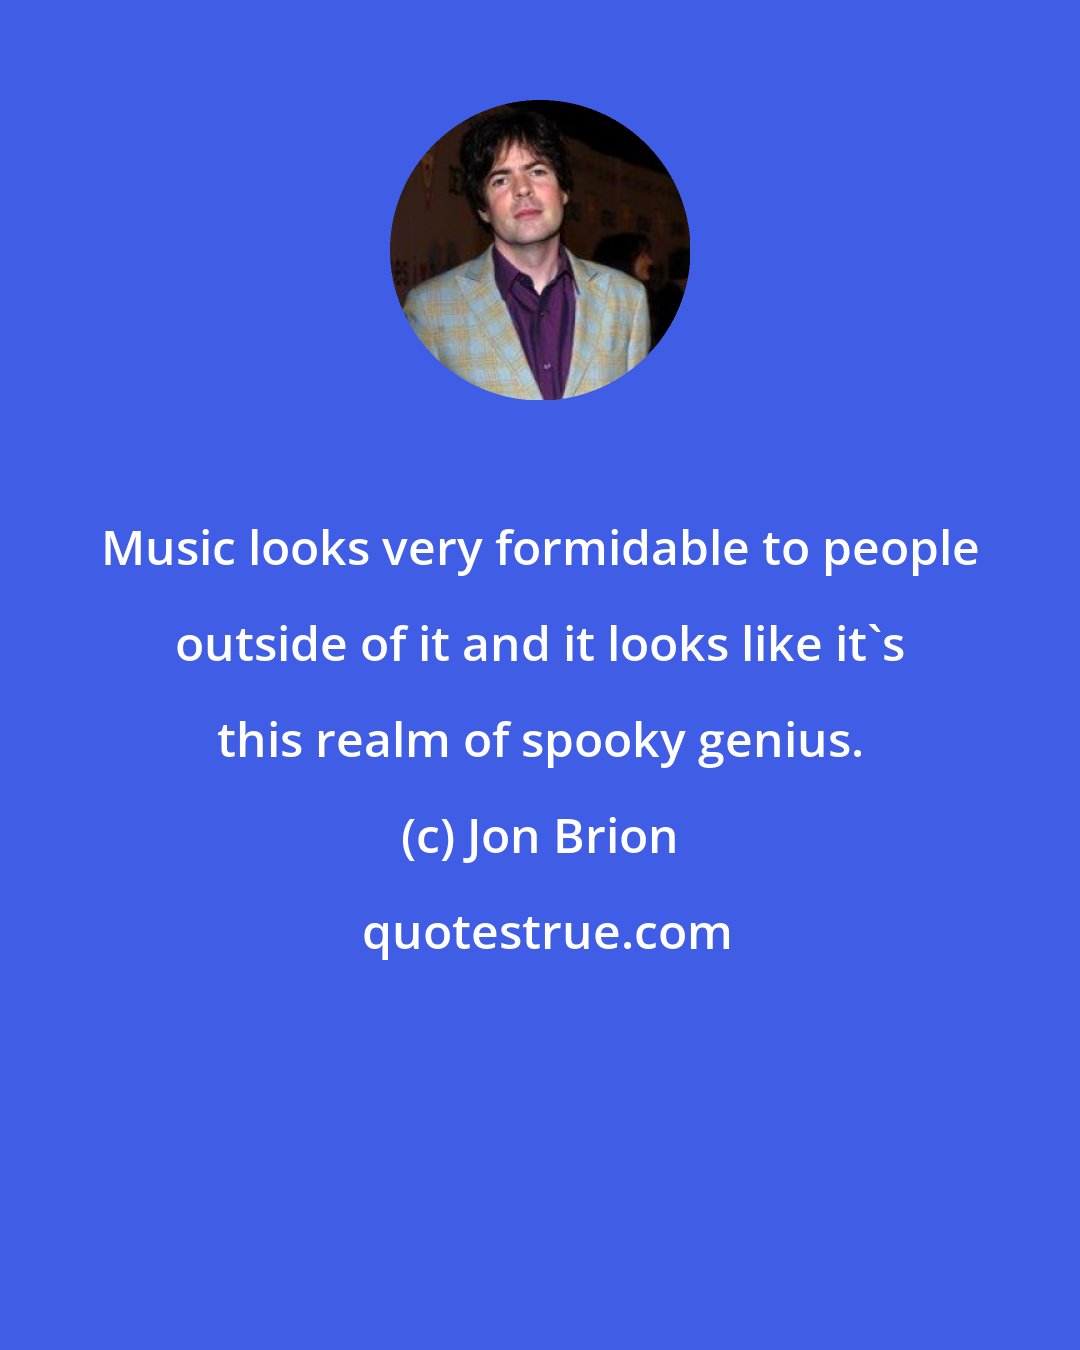 Jon Brion: Music looks very formidable to people outside of it and it looks like it's this realm of spooky genius.